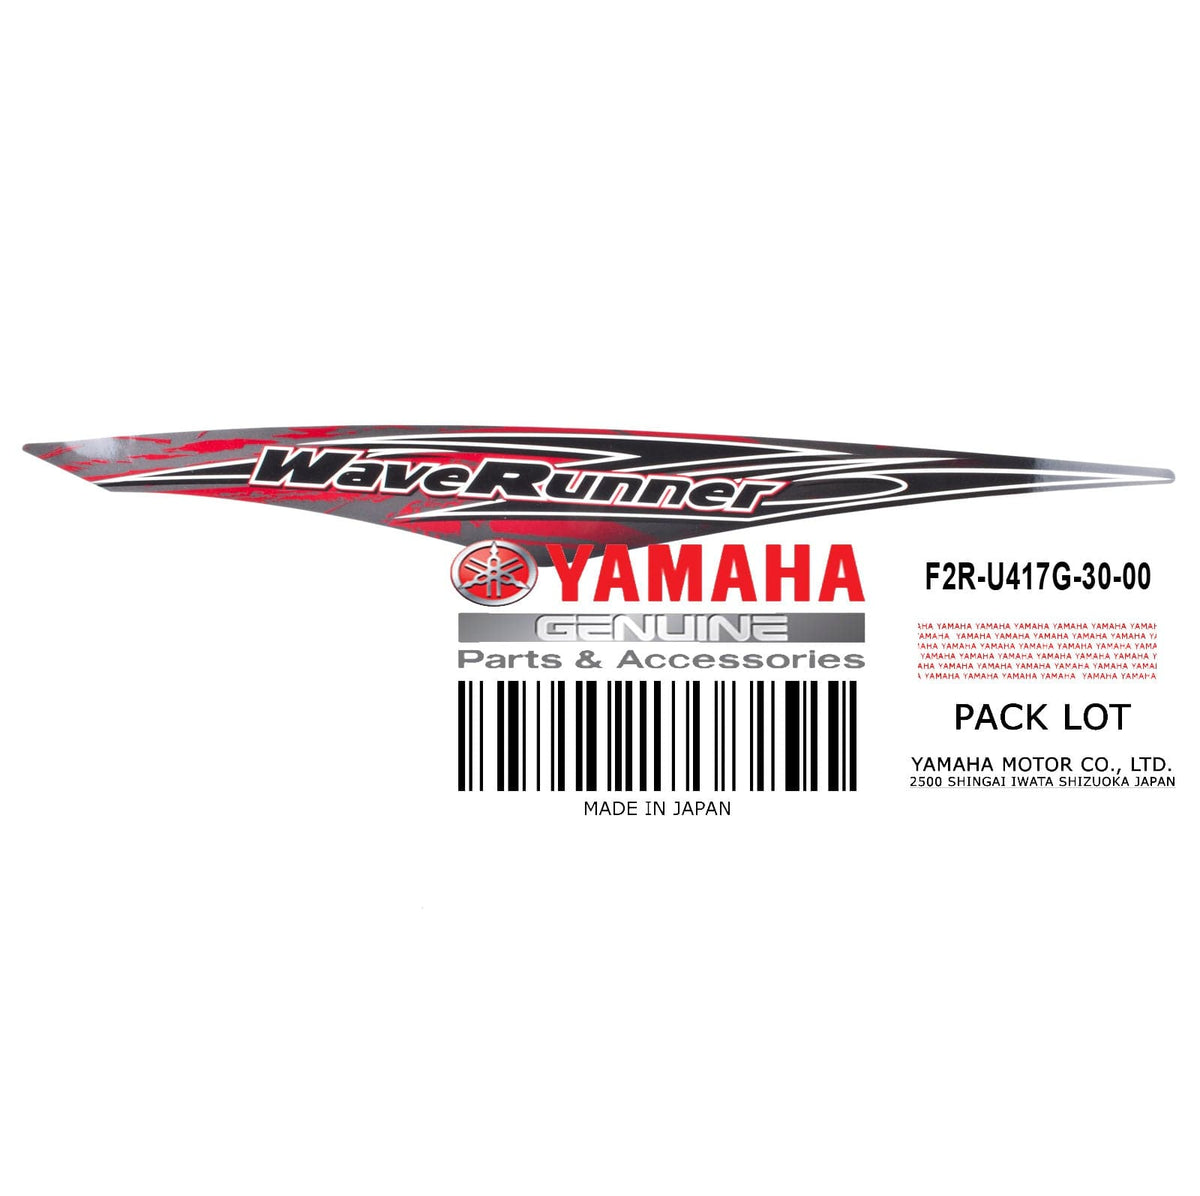 Yamaha Waverunner Parts Accessories and Apparel